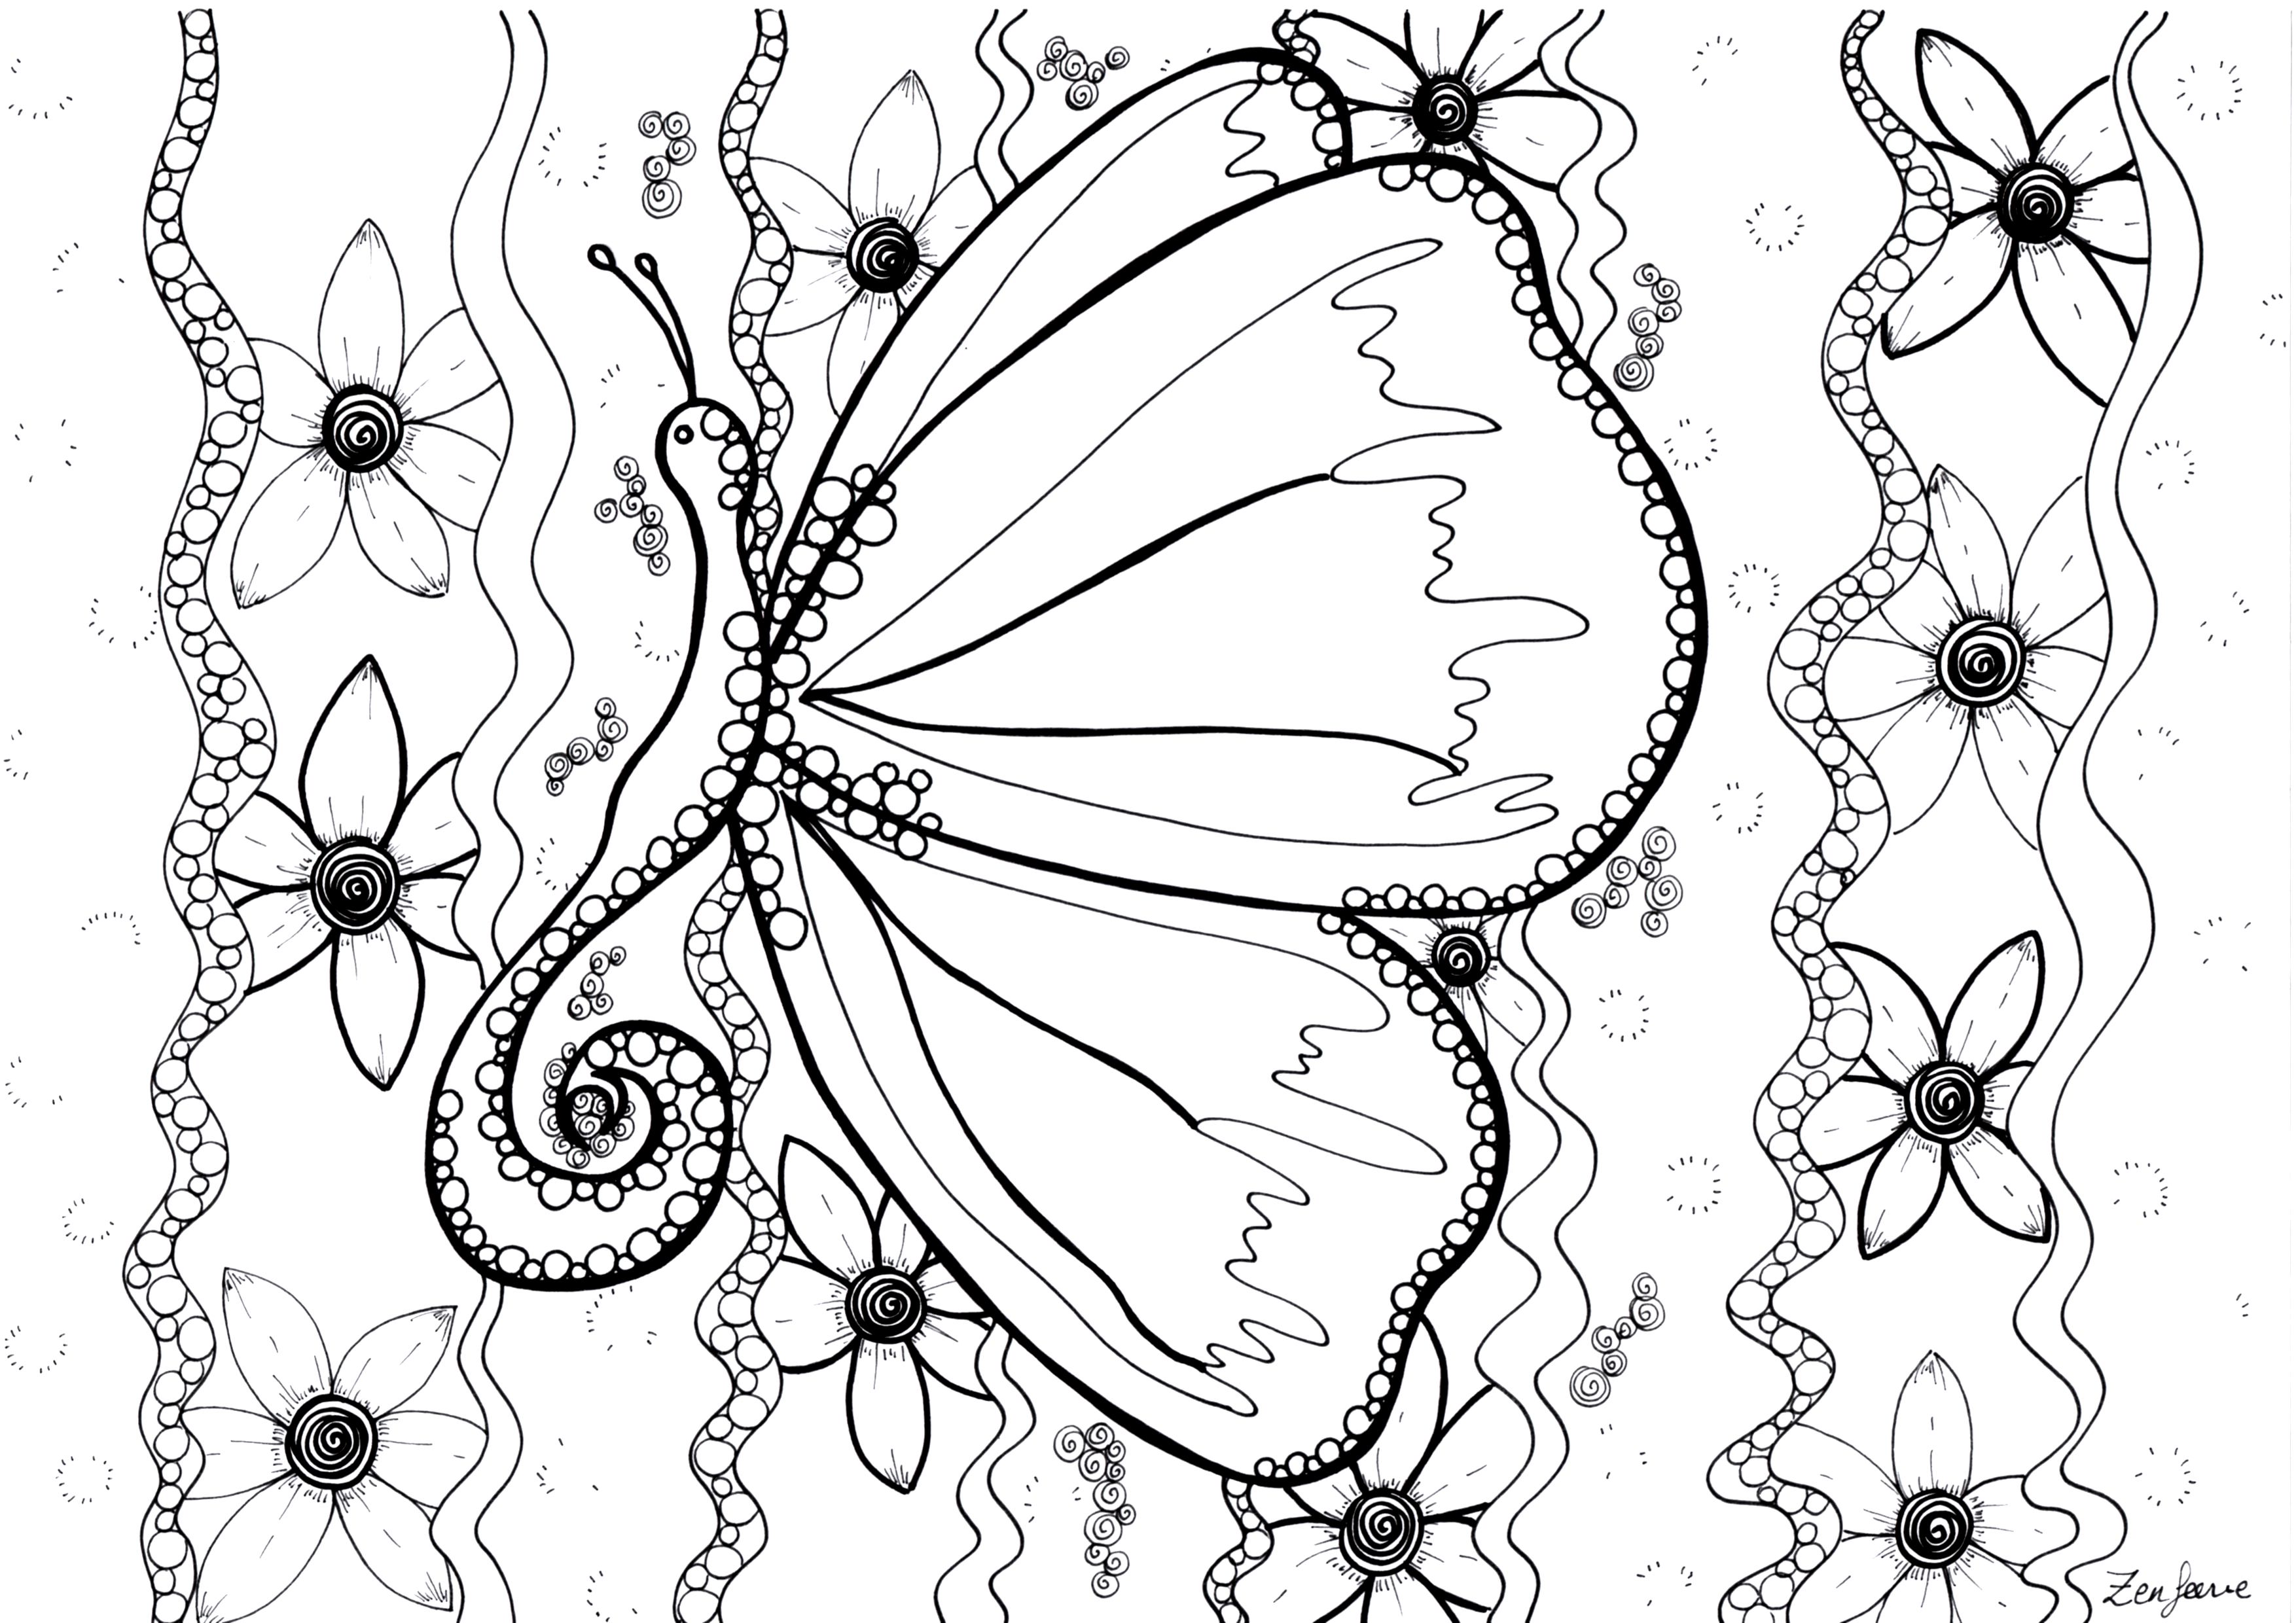 Zentangle to color for kids - Zentangle Kids Coloring Pages